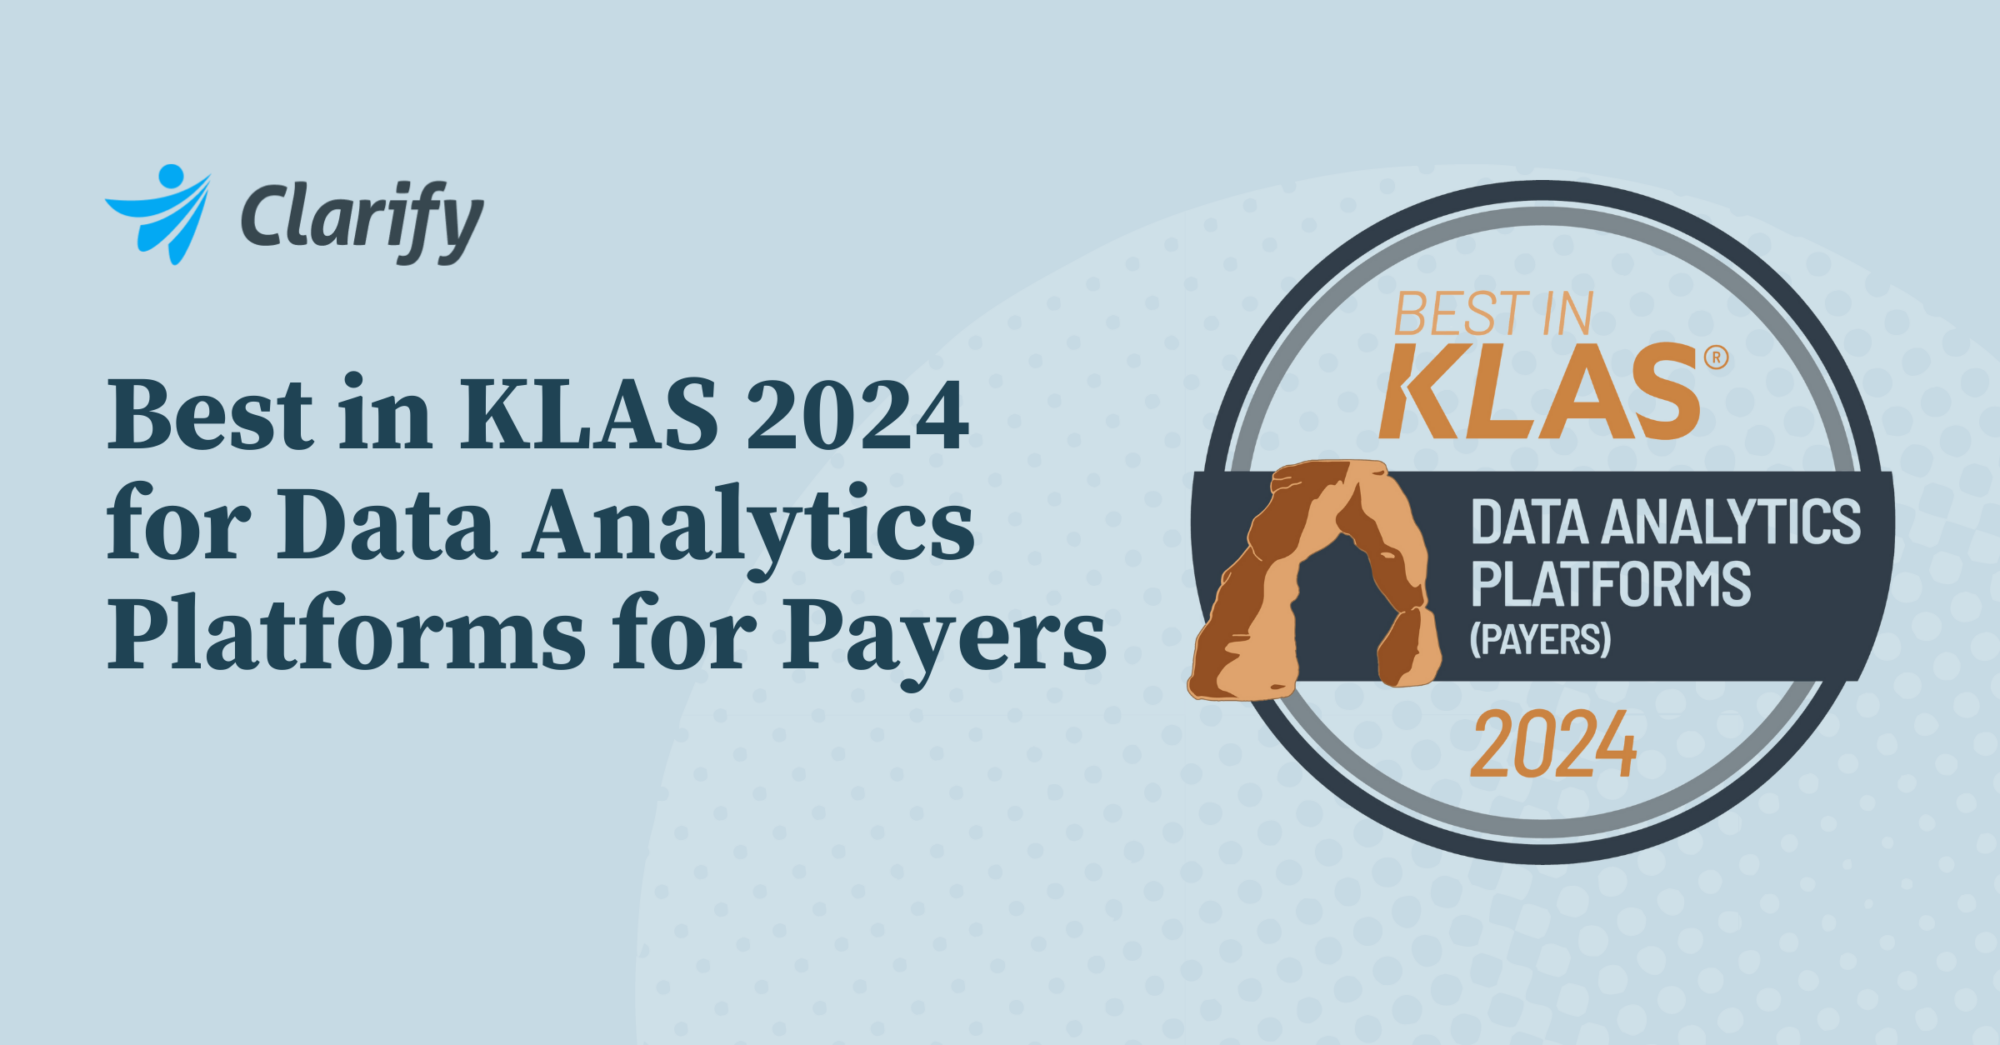 Thumbnail for Clarify Health Awarded Best in KLAS 2024 for Data Analytics Platforms for Payers